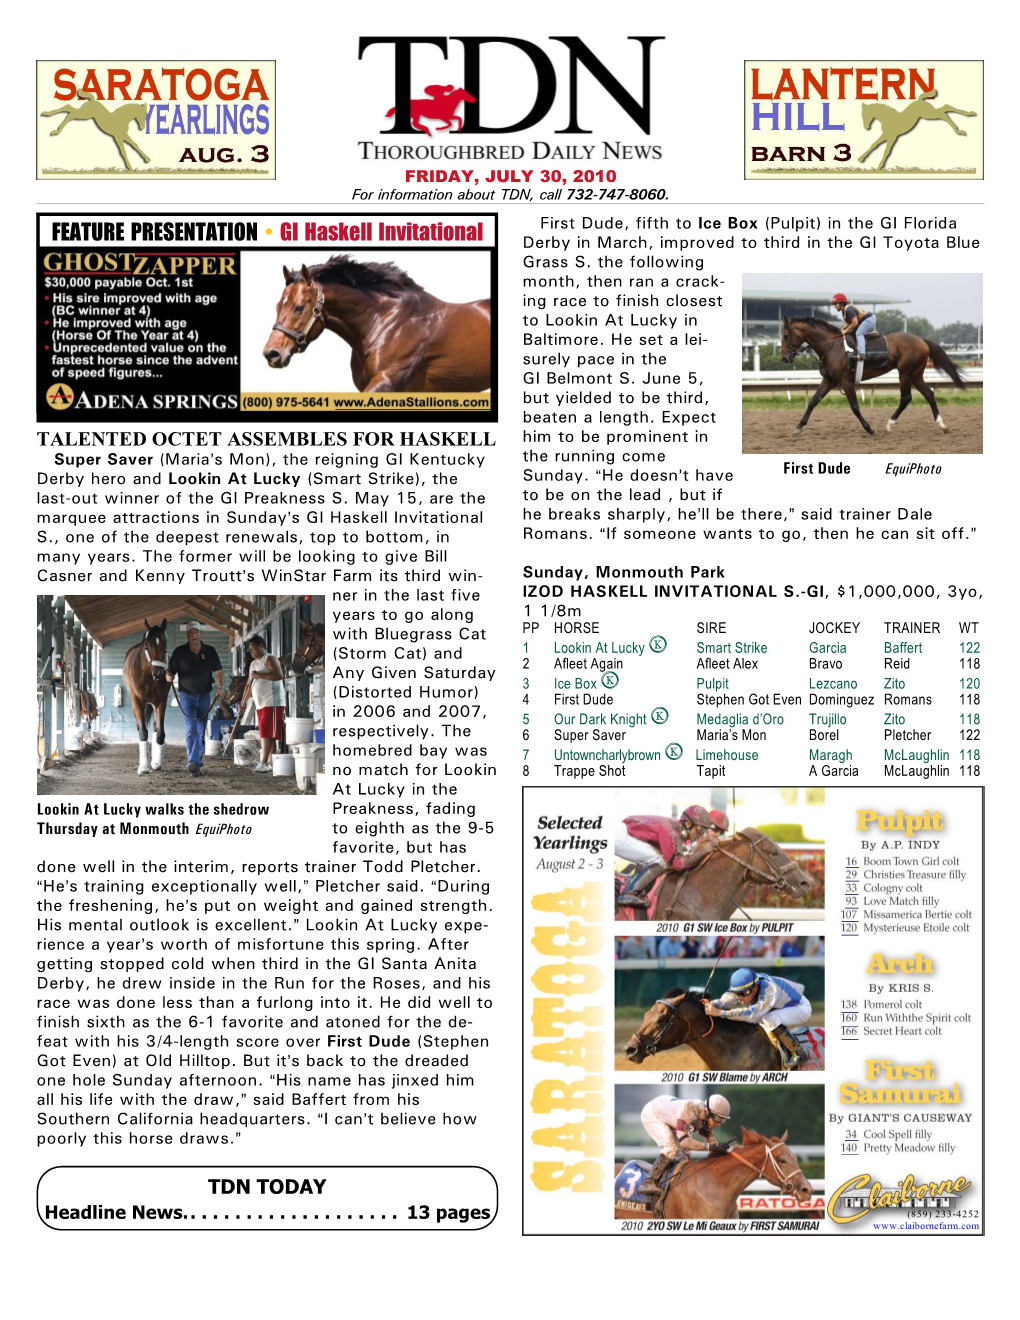 FEATURE PRESENTATION • GI Haskell Invitational Derby in March, Improved to Third in the GI Toyota Blue Grass S